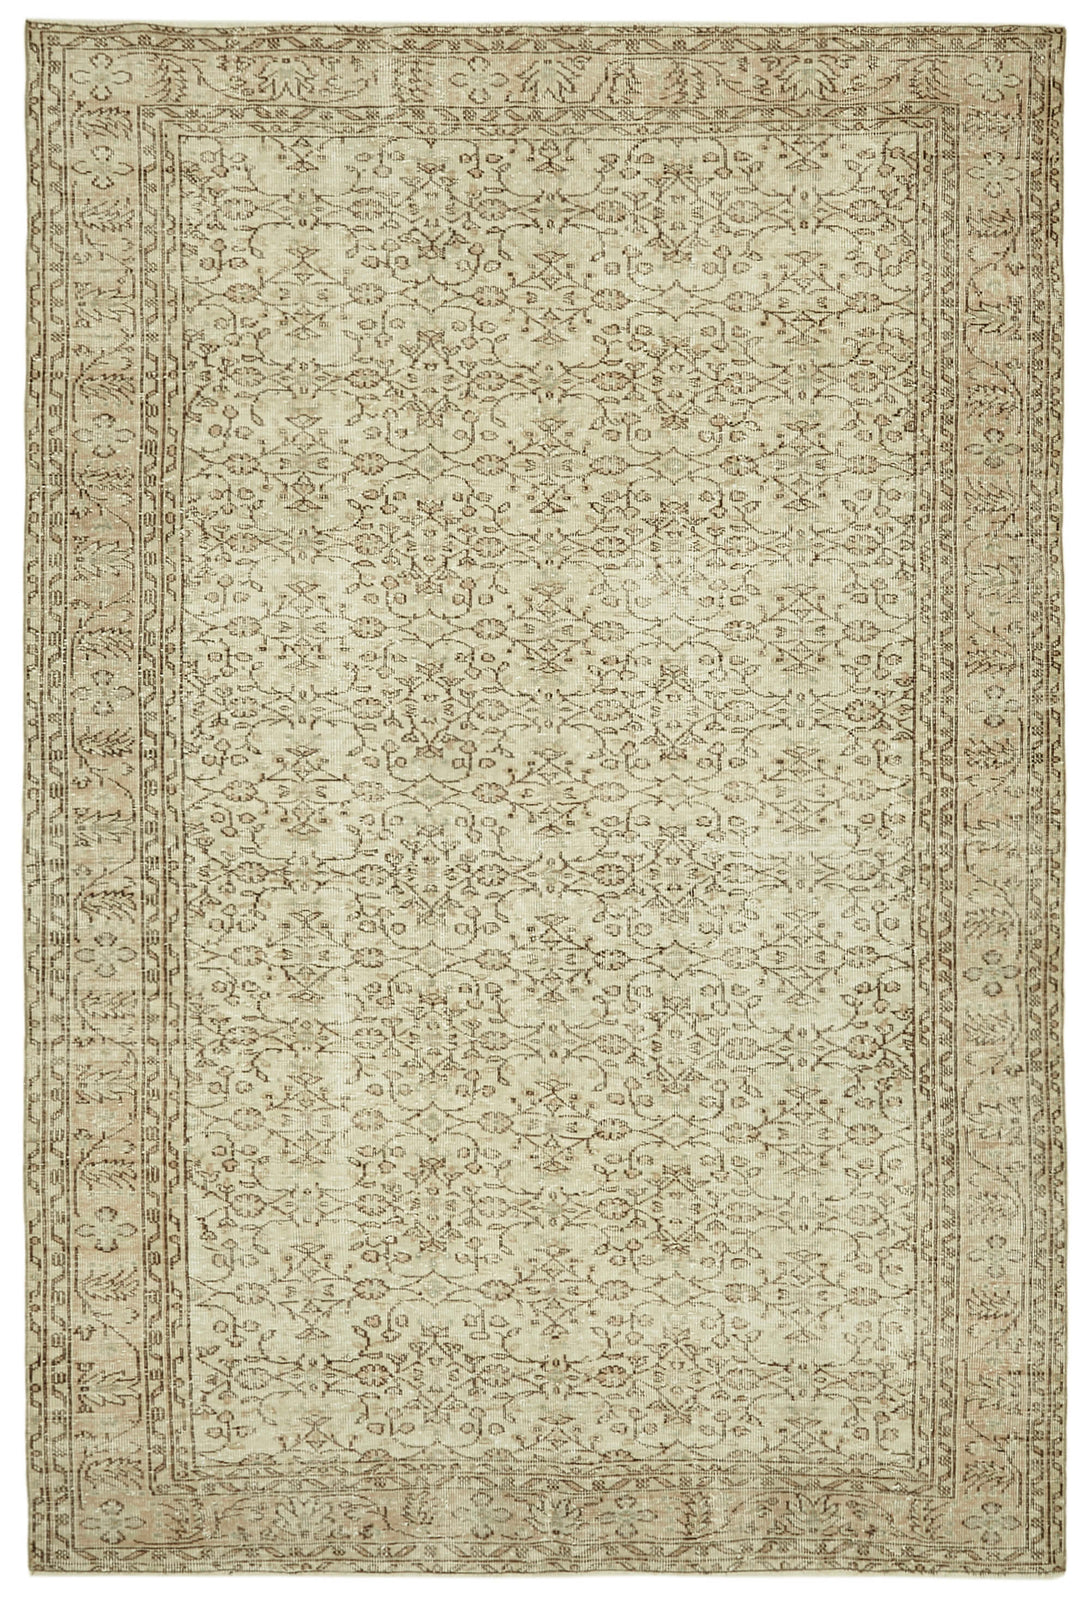 Handmade White Wash Area Rug > Design# OL-AC-41413 > Size: 6'-9" x 9'-10", Carpet Culture Rugs, Handmade Rugs, NYC Rugs, New Rugs, Shop Rugs, Rug Store, Outlet Rugs, SoHo Rugs, Rugs in USA